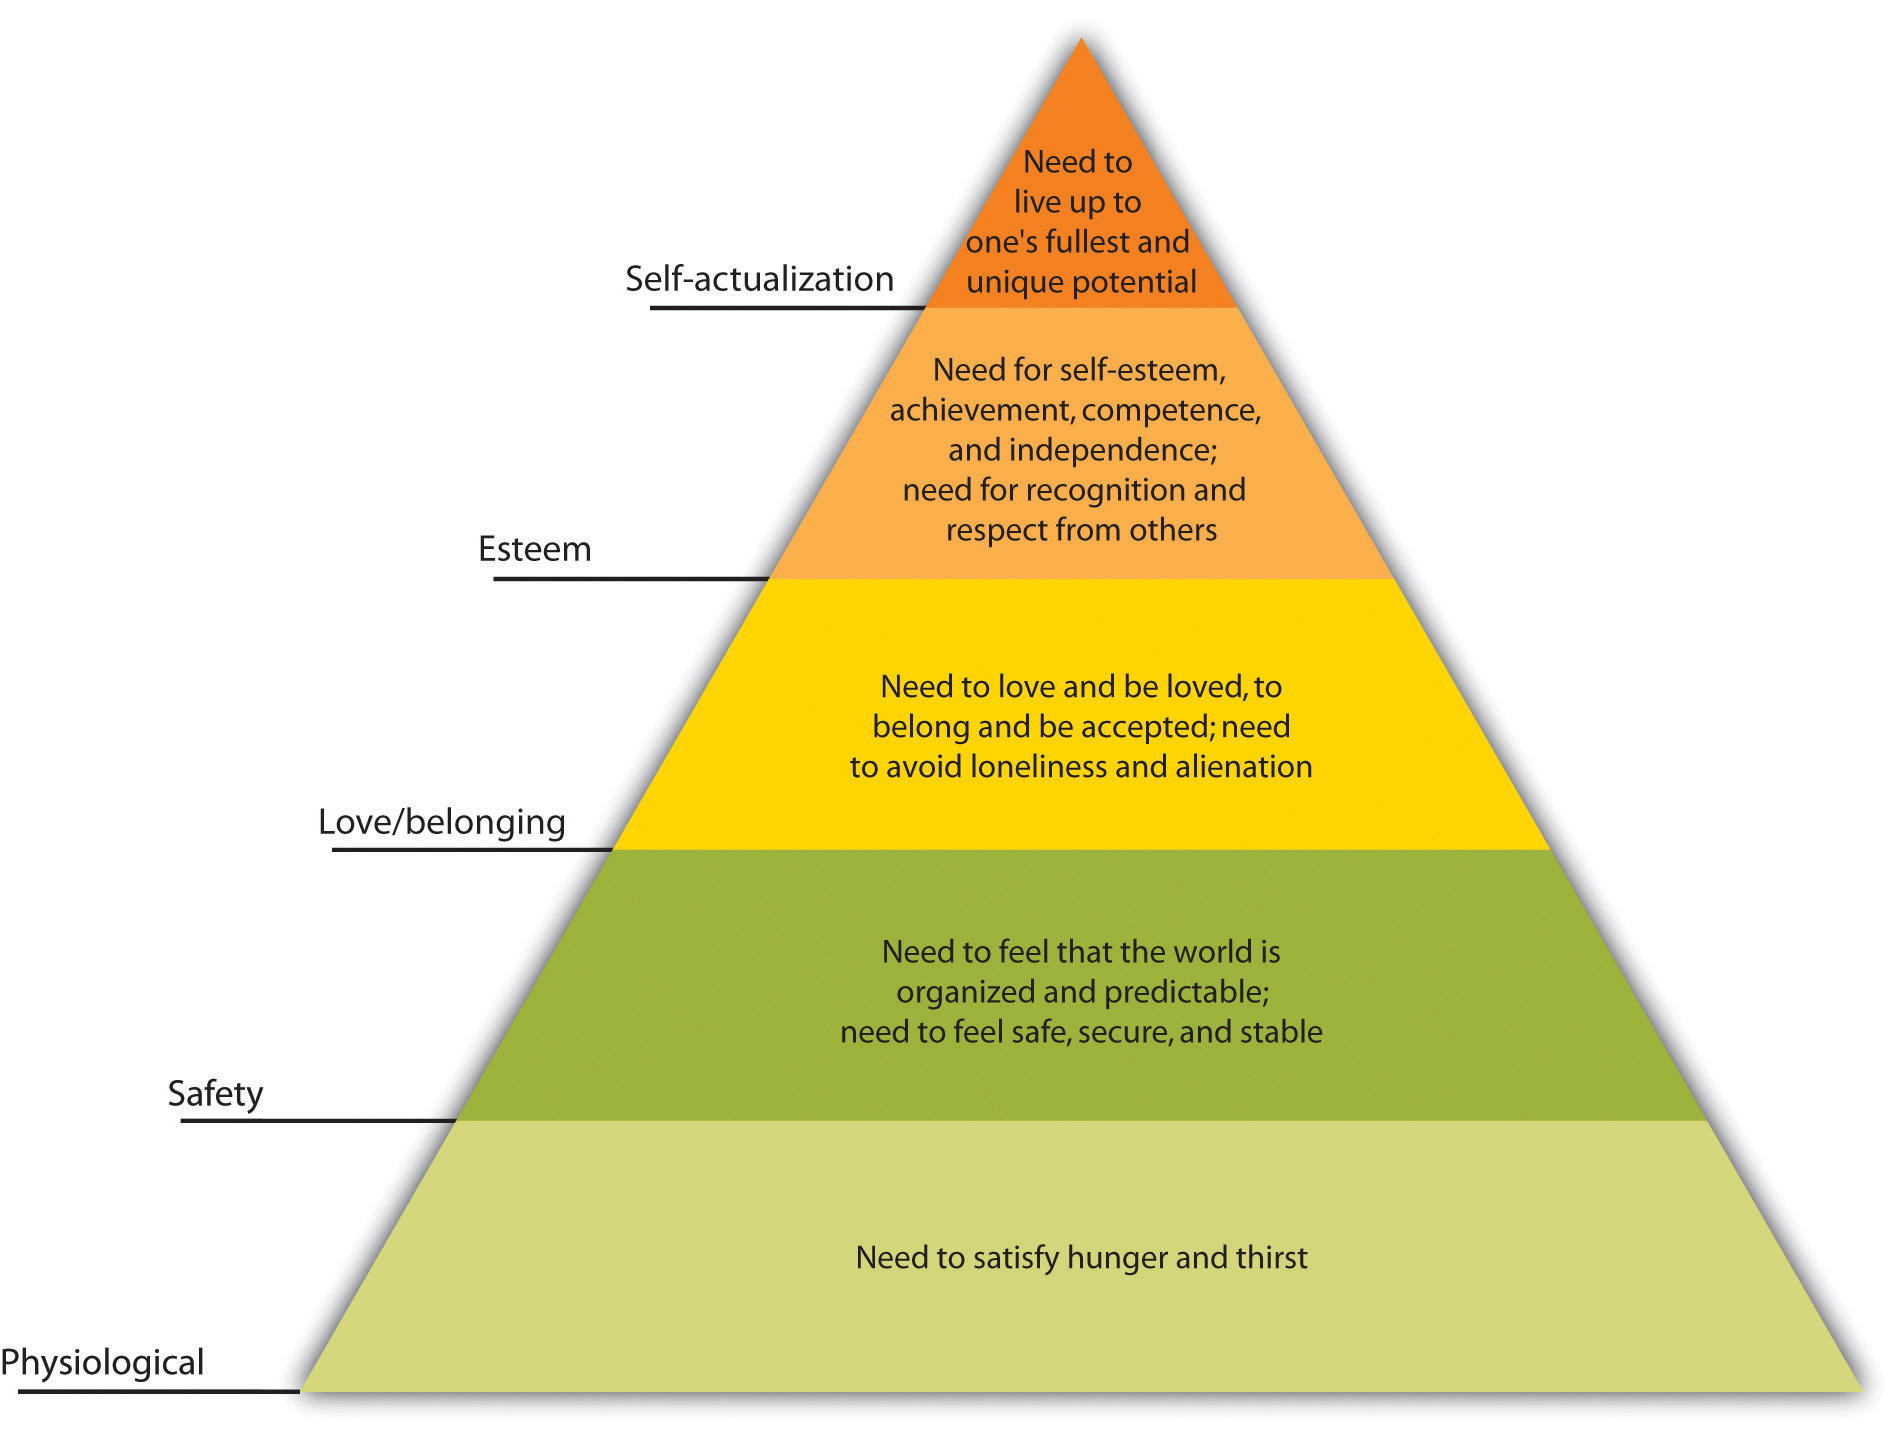 Pyramid of Maslow's hierarchy of needs. From lowest to highest the hierarchy is physiological, safety, love/belonging, esteem, and self- actualization.